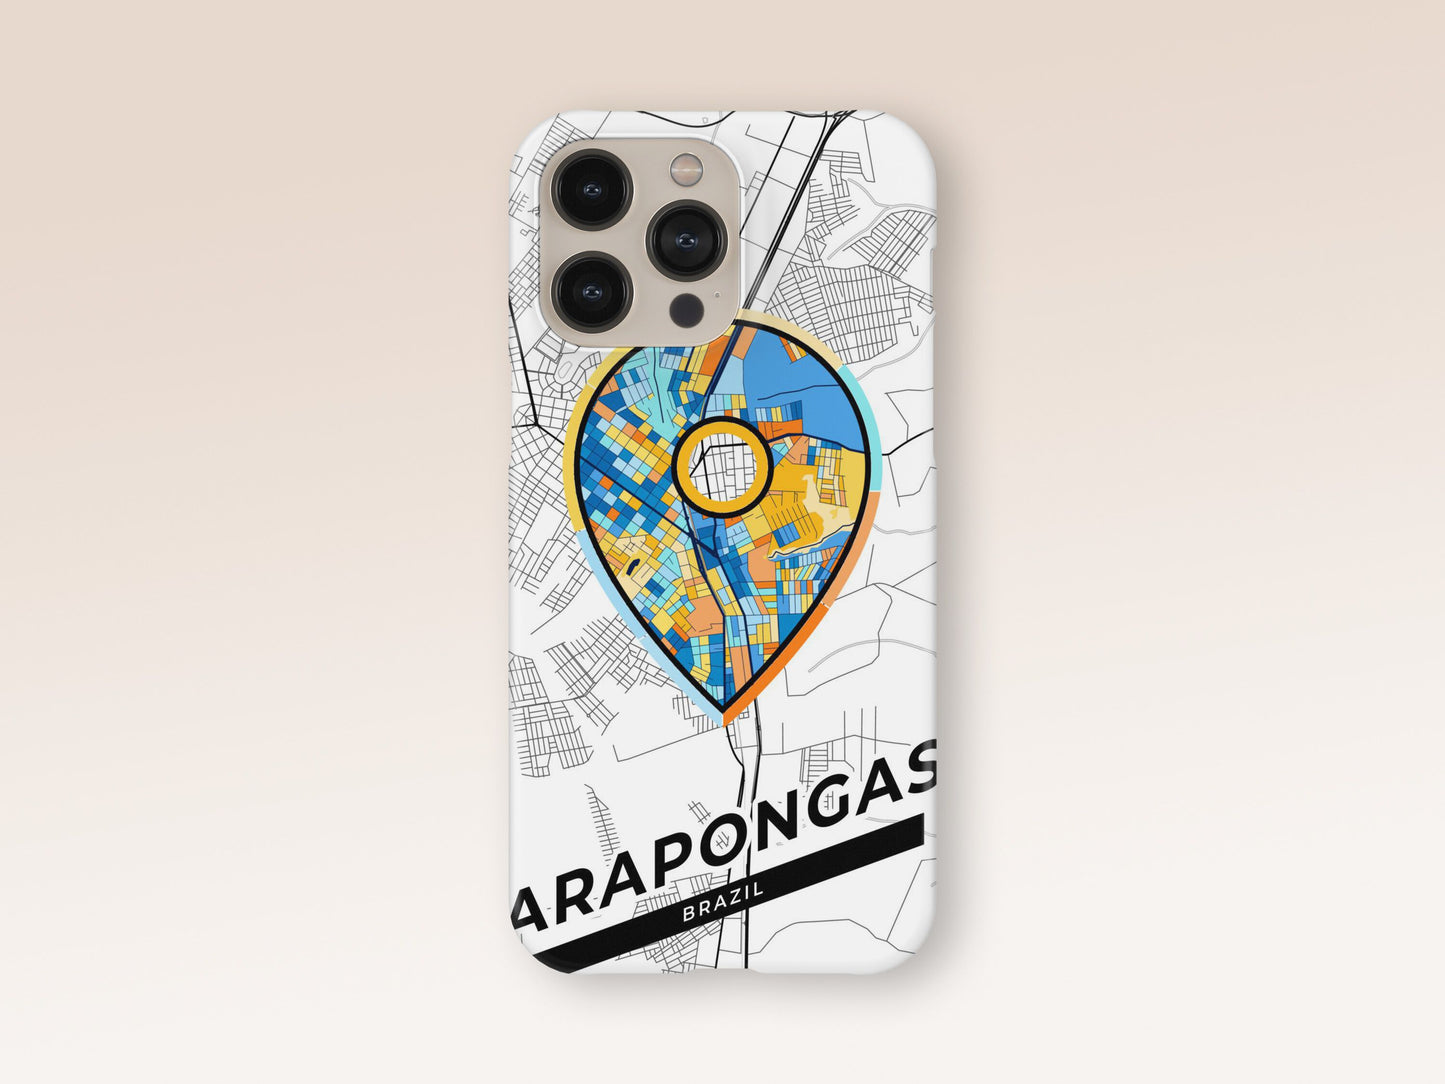 Arapongas Brazil slim phone case with colorful icon. Birthday, wedding or housewarming gift. Couple match cases. 1